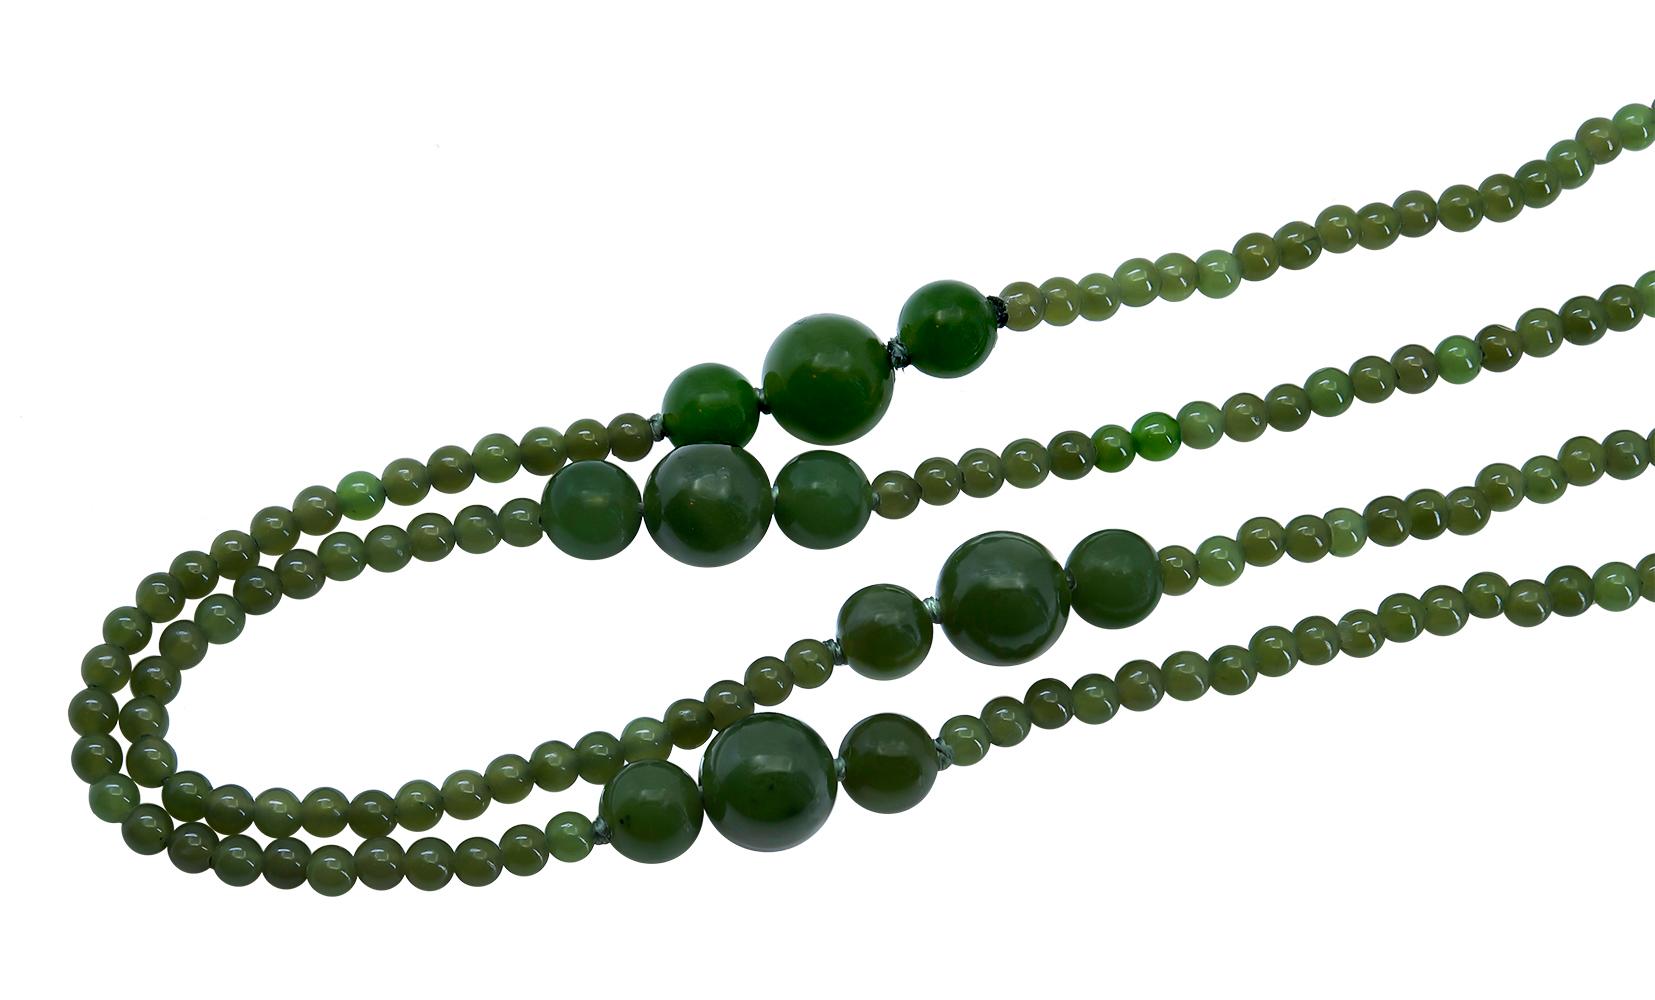 A 44 inch Natural Green Jade Necklace with a trinity of deep green 6 and 8 mm jadeite round beads connected by a string of consecutive 3 mm round jade beads that are lighter in tone creating a well balanced contrast to the darker toned trinity of